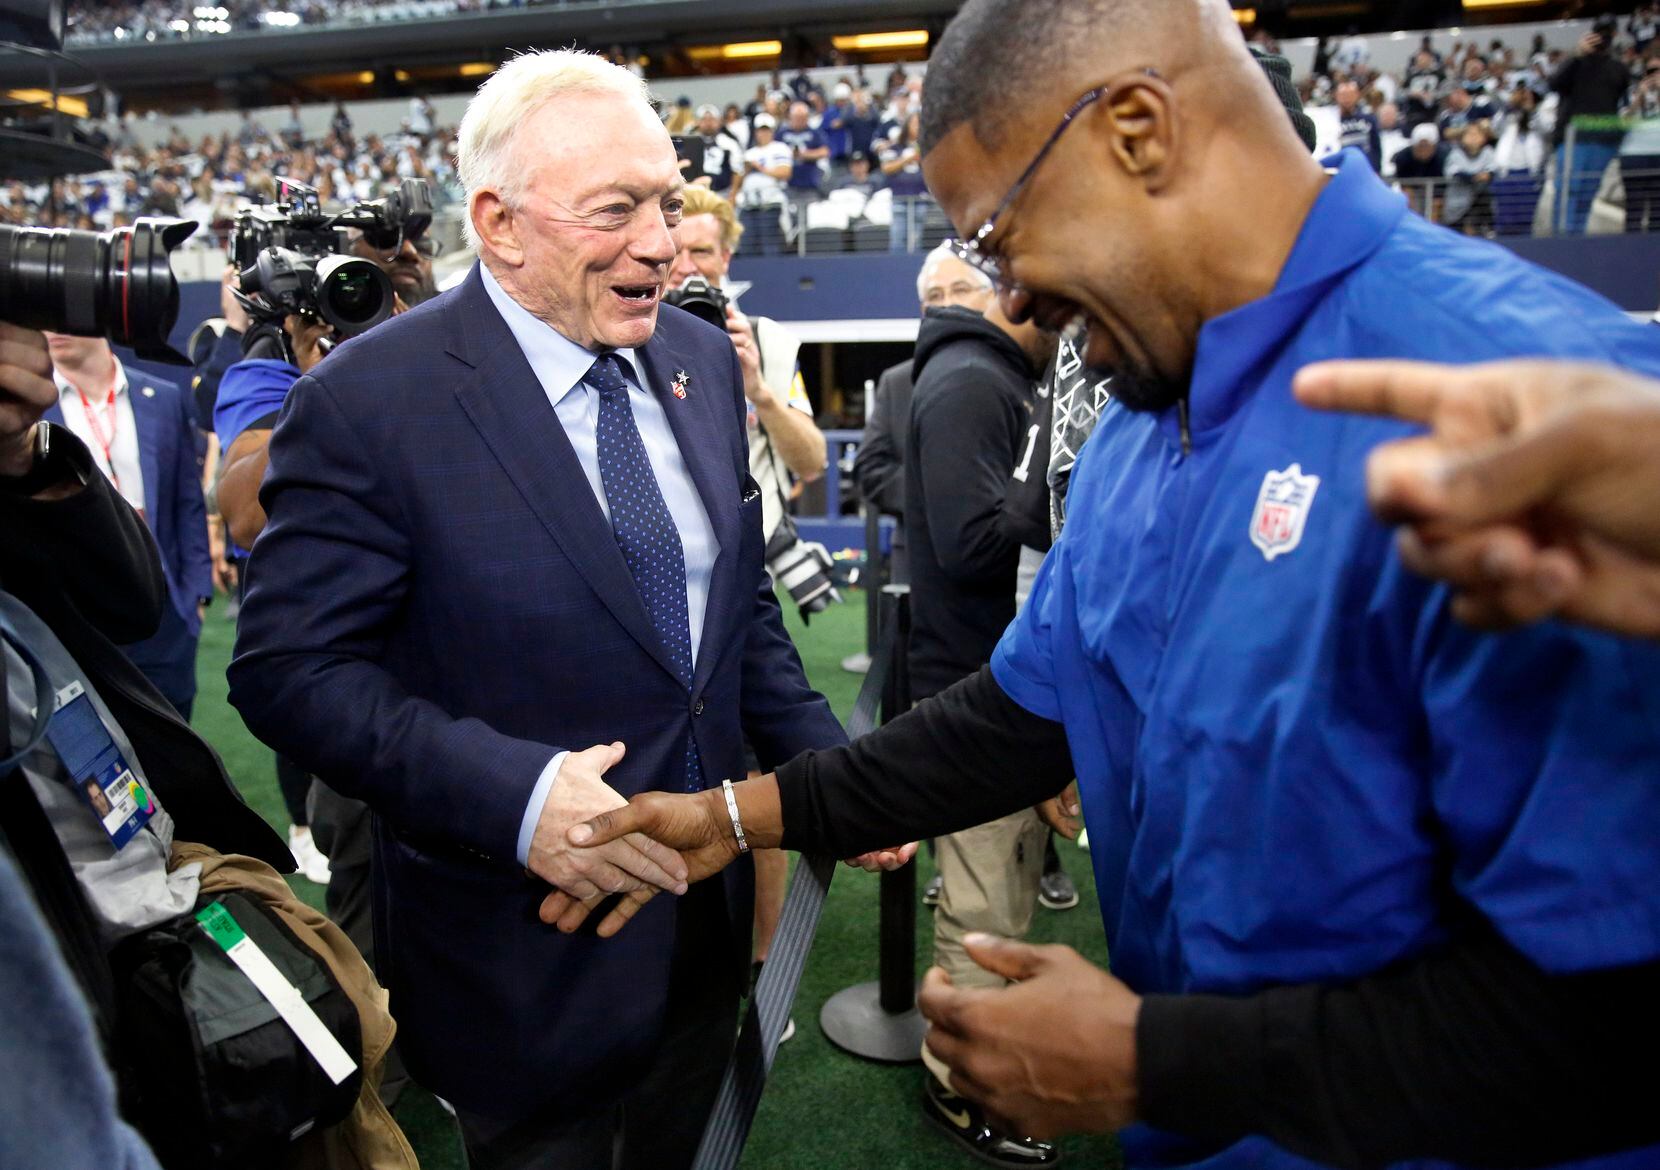 Dallas Cowboys owner Jerry Jones (left) jokingly tells actor Jamie Foxx to get in the game as they meet during pregame warmups at AT&T Stadium in Arlington, November 25, 2021. The Cowboys were facing the Las Vegas Raiders on Thanksgiving Day. (Tom Fox/The Dallas Morning News)